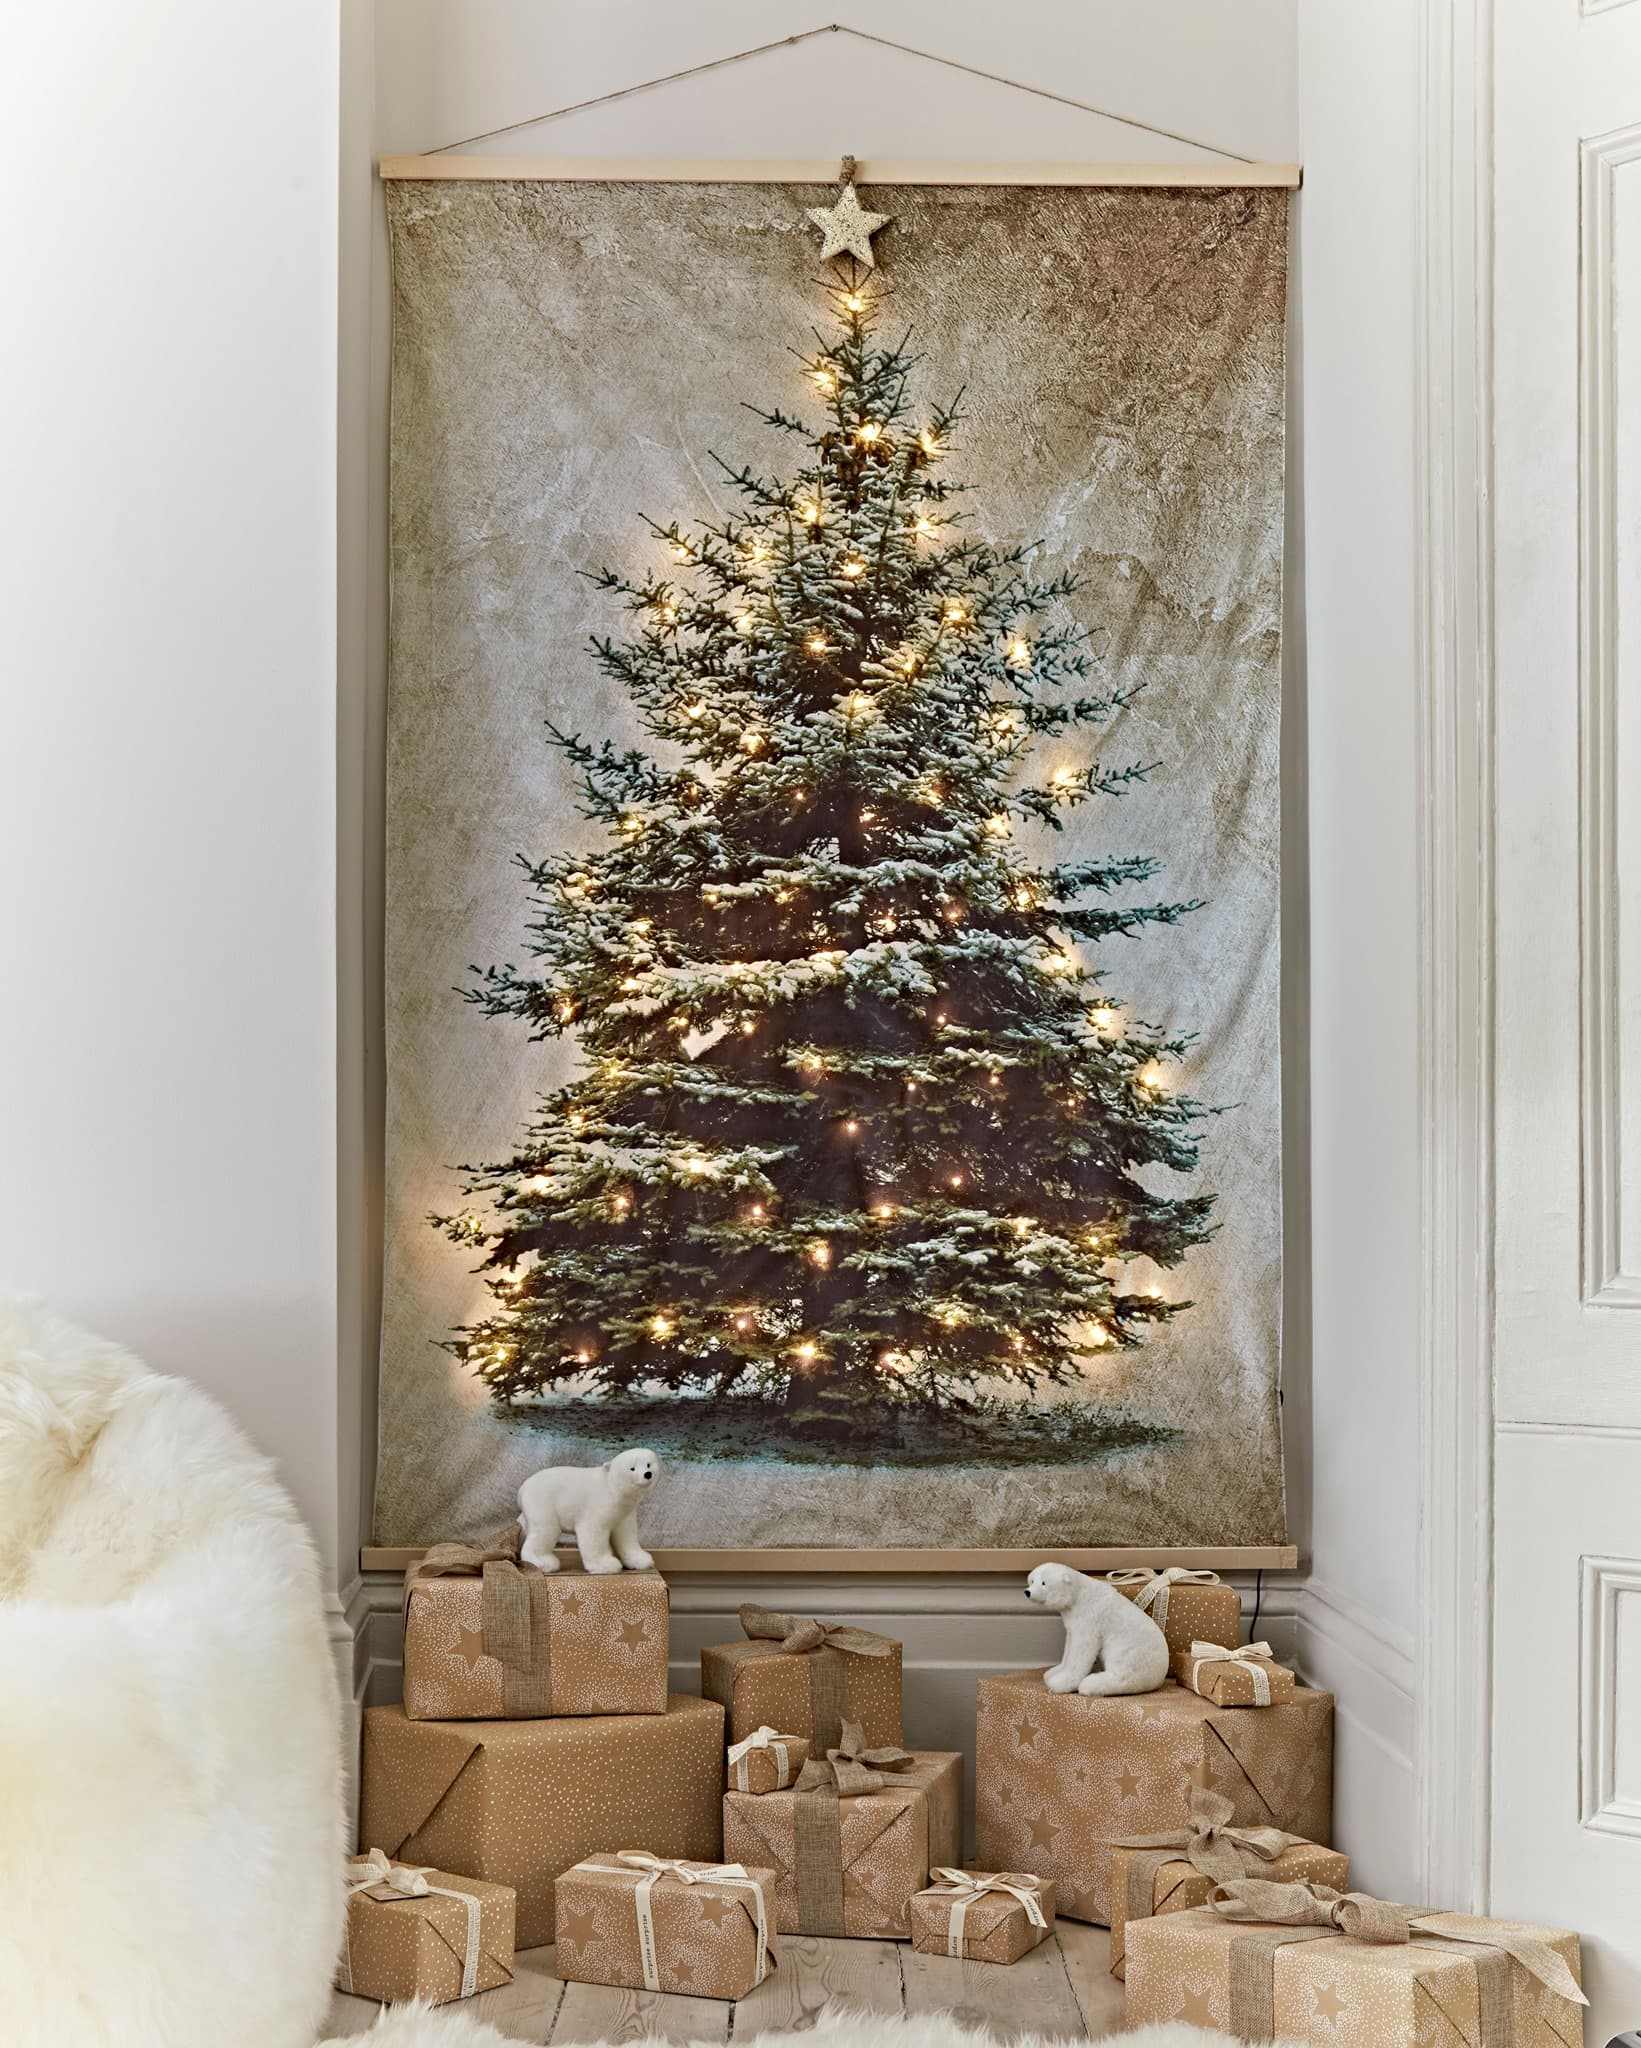 Christmas tree idea featuring Lit Tree Wall Hanging alternative for small homes and apartments